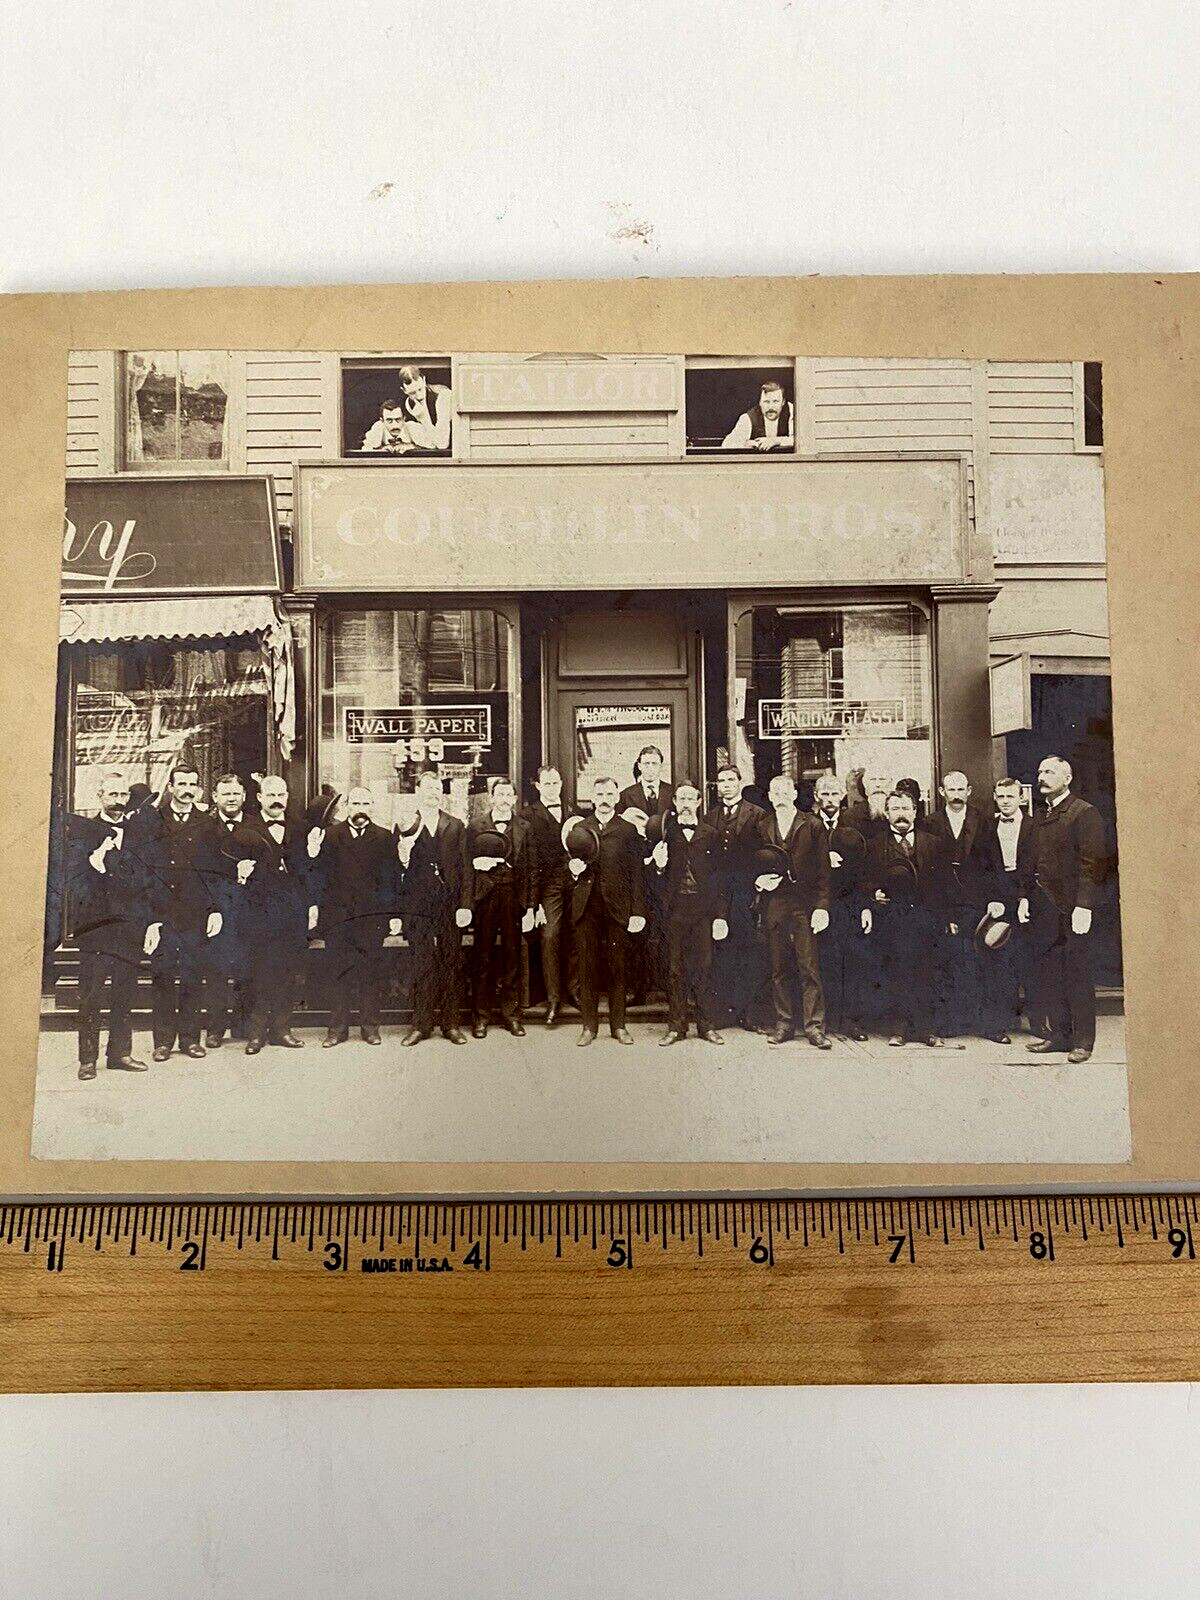 original 1920s NEW YORK BUSINESS STORE FRONT PHOTO TAILOR SHOP WALL PAPER